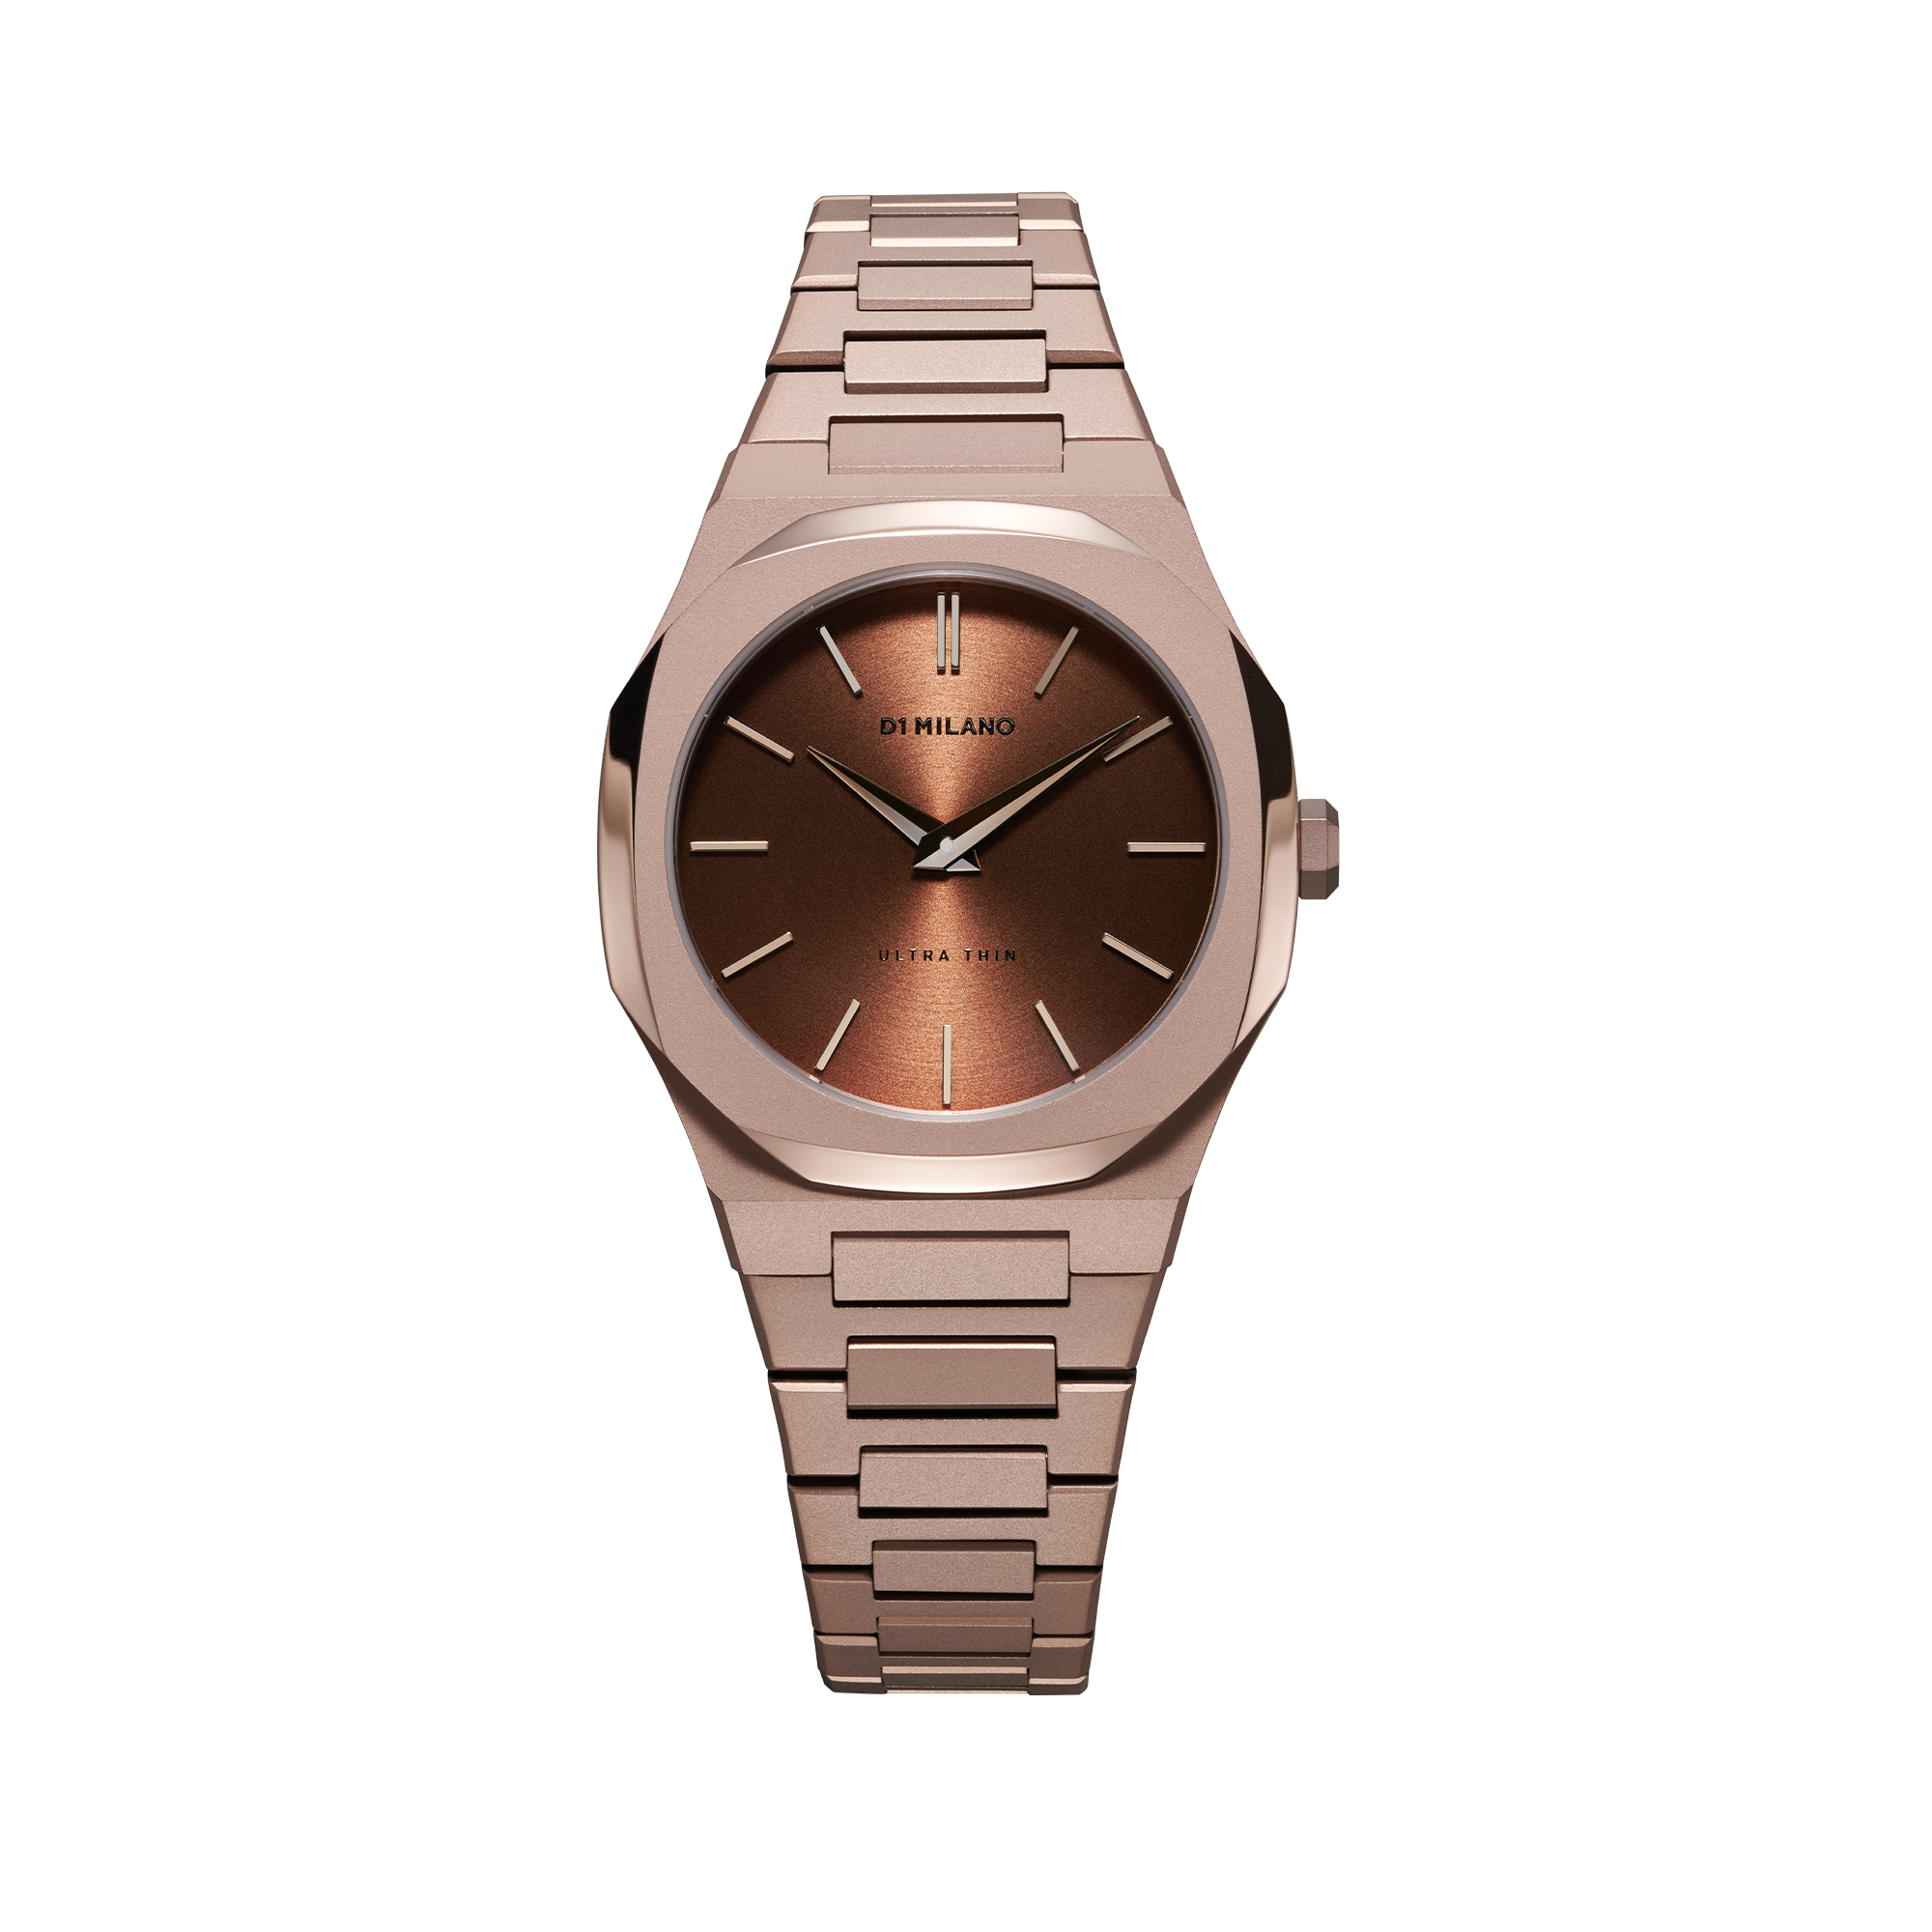 D1 Milano Watches For Men and Women